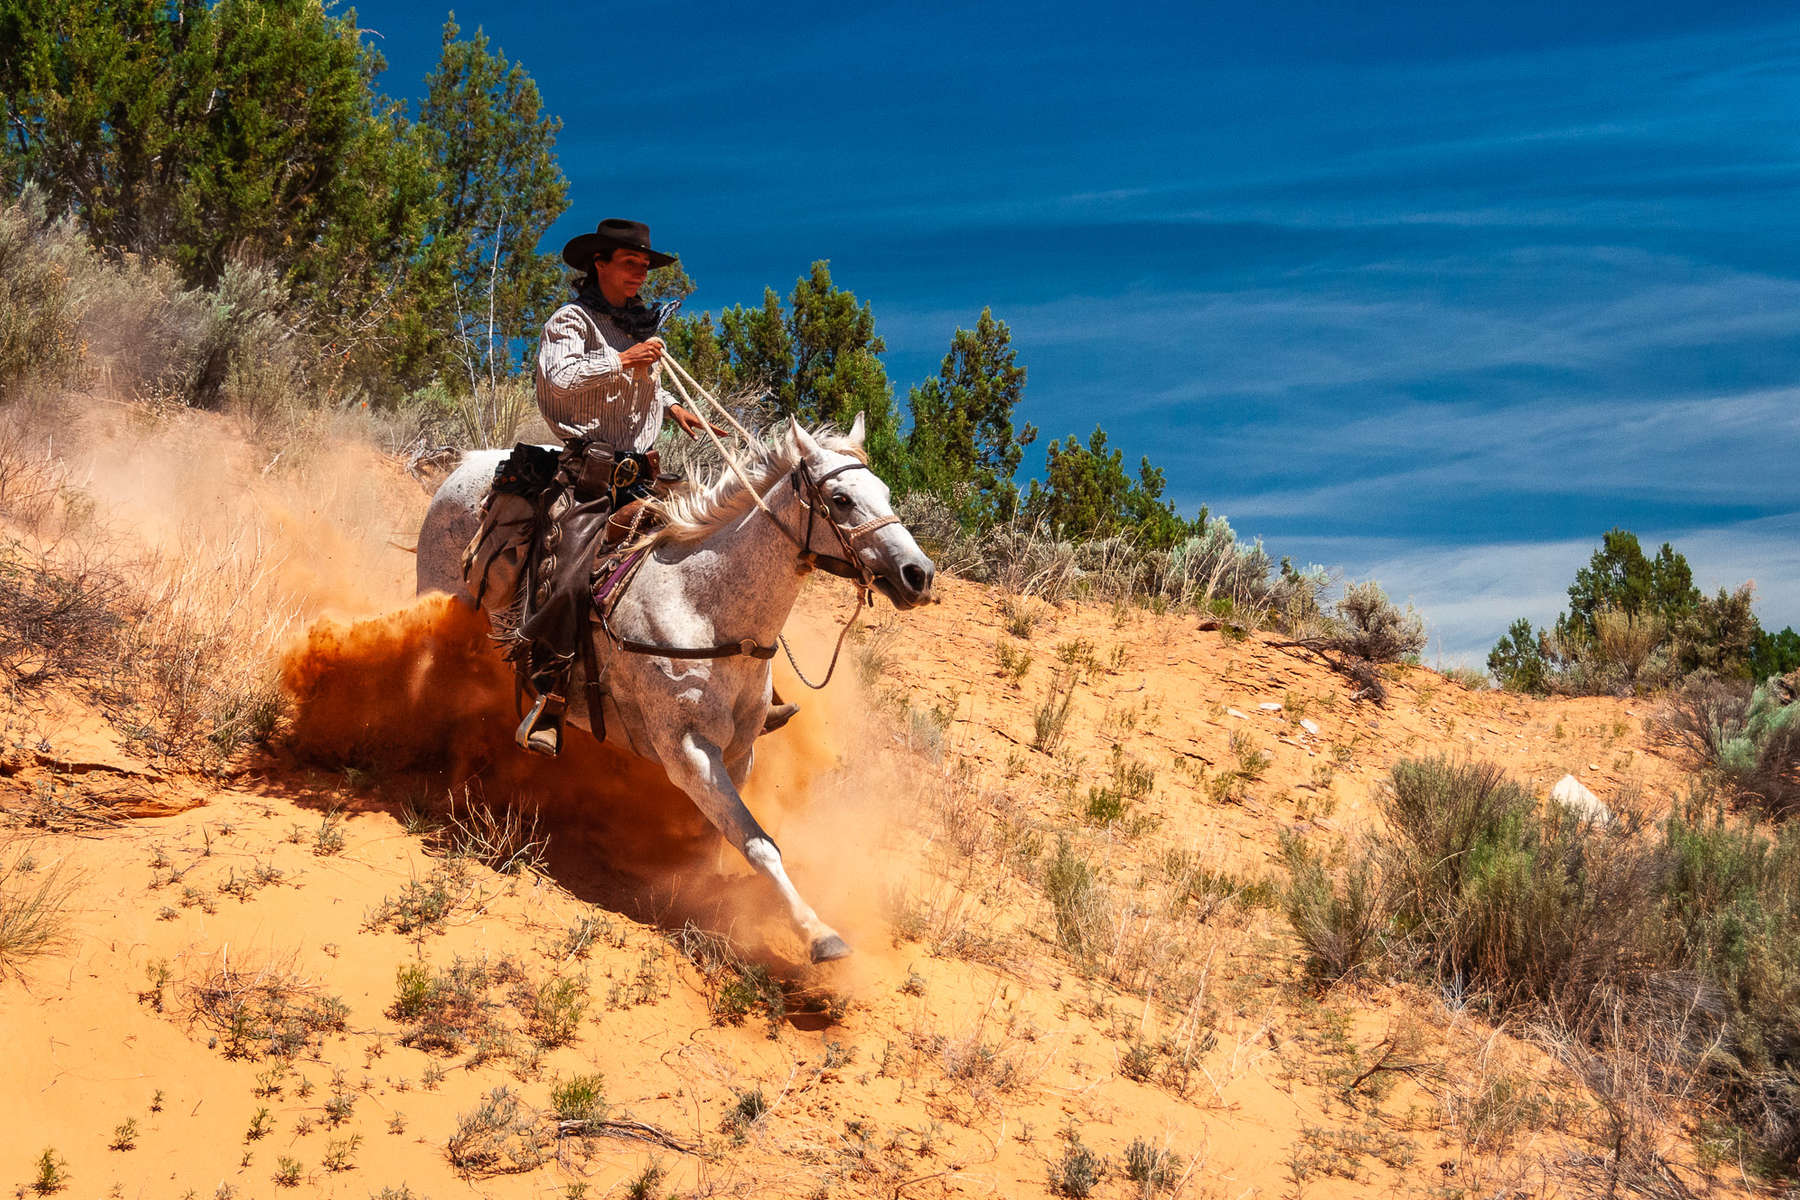 Trail ride through the old Wild West America